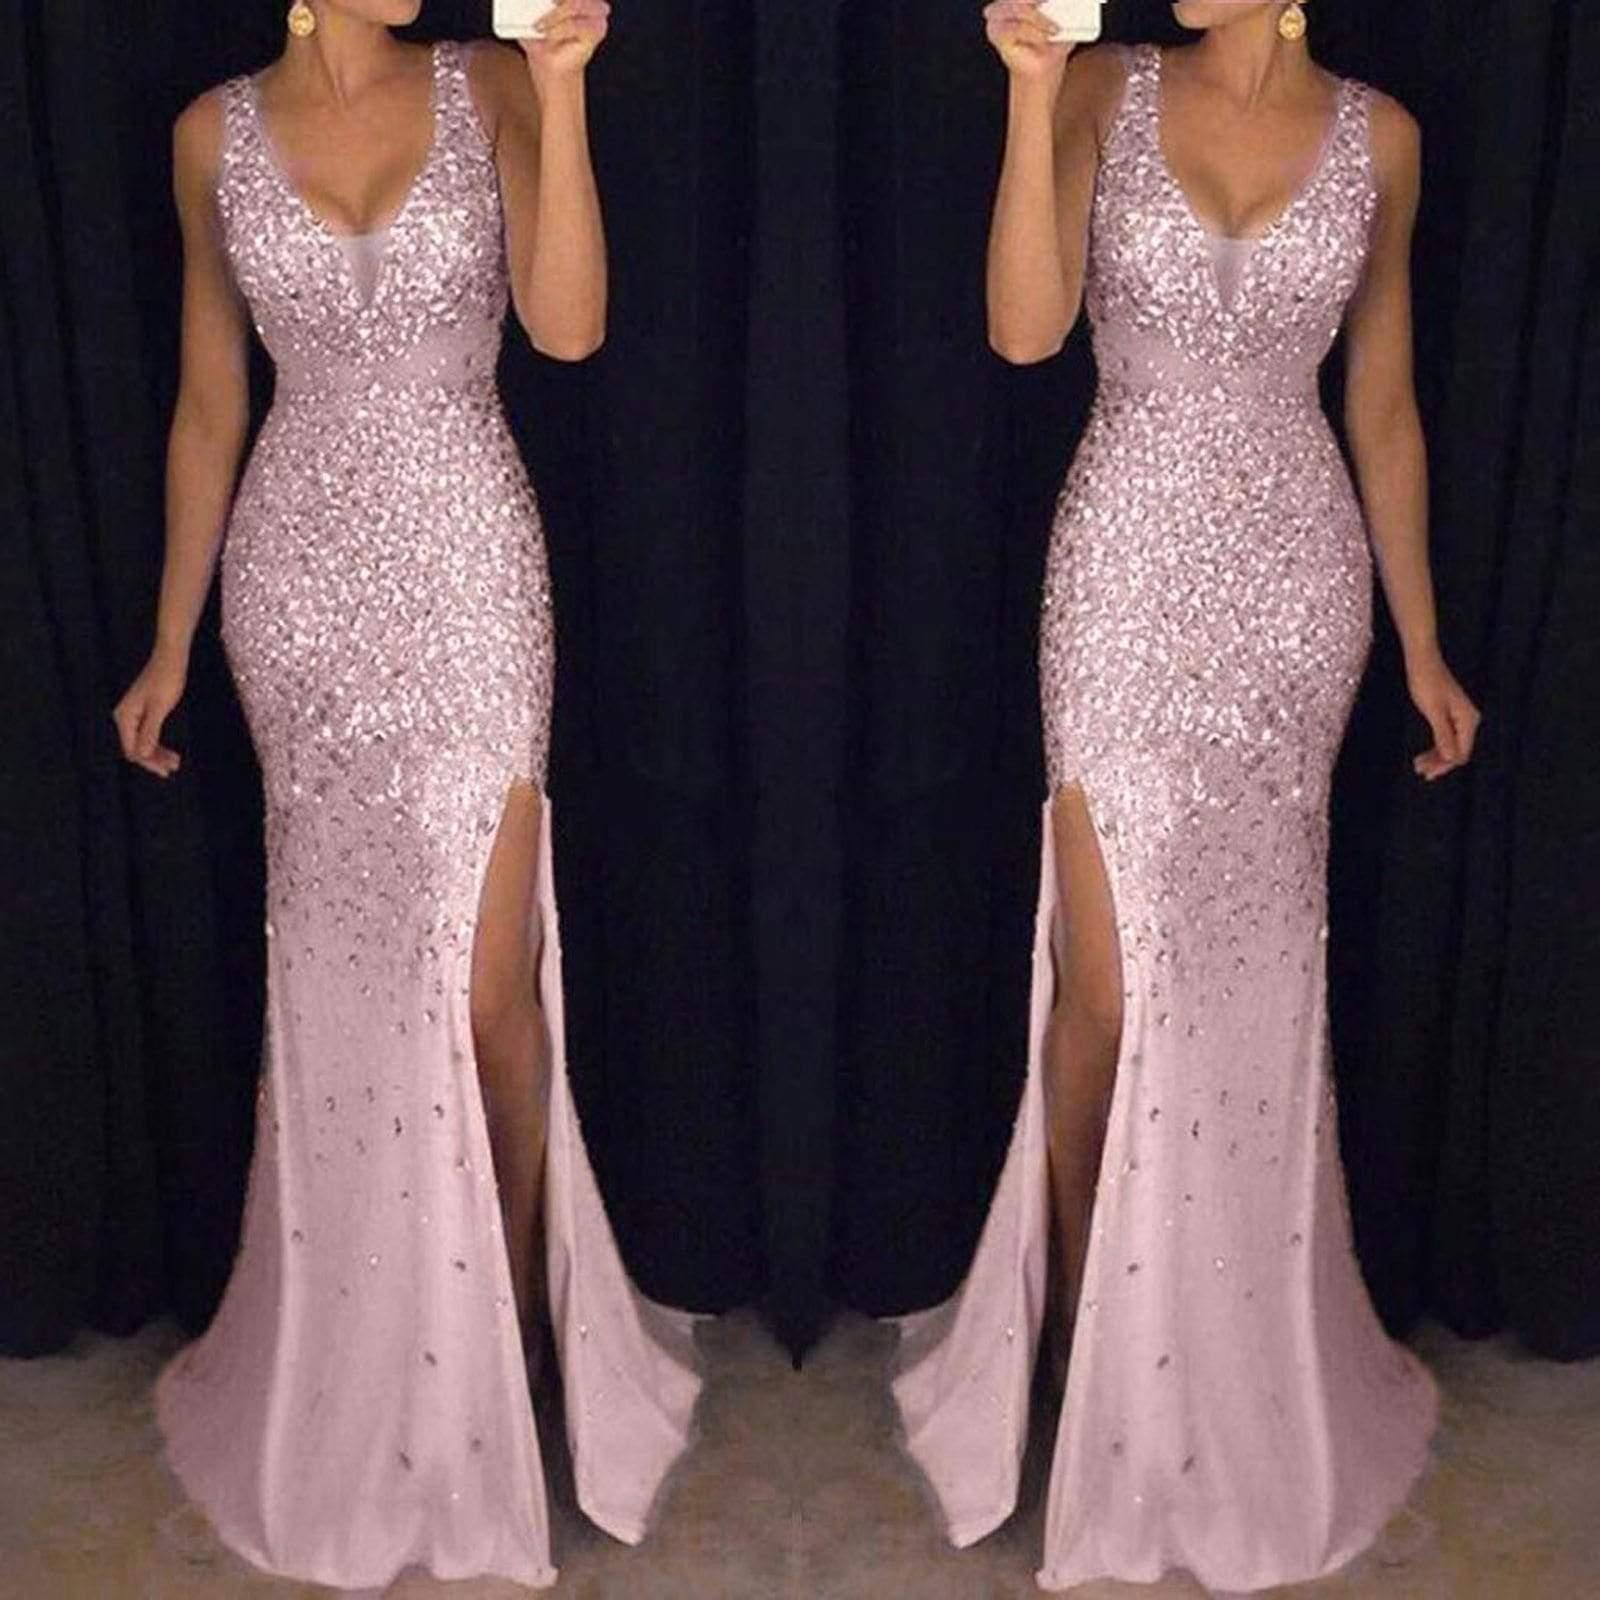 Sparkly Bodycon Gown & Elegant Party Dress For Women - For Women USA